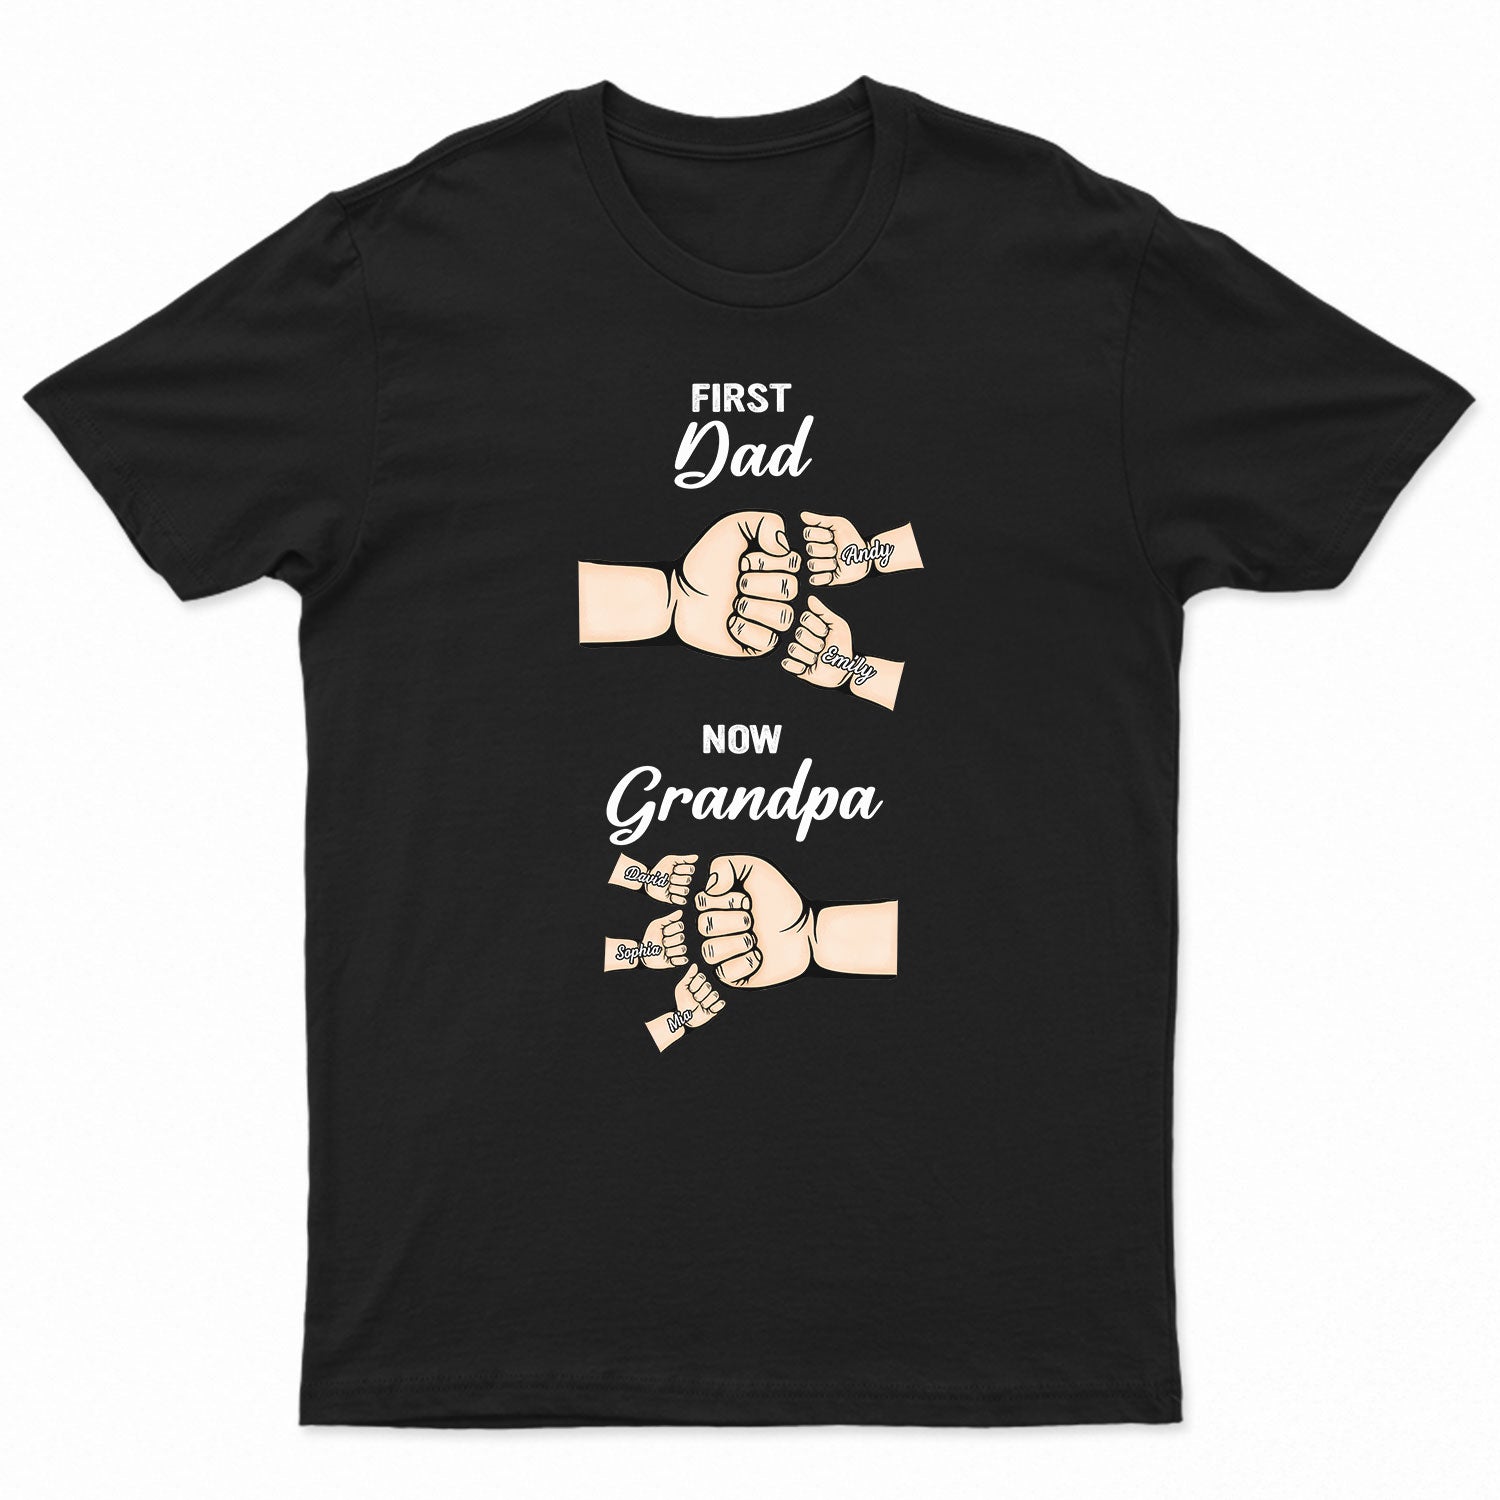 First Dad Now Grandpa - Birthday, Loving Gift For Daddy, Father, Grandfather, Husband - Personalized Custom T Shirt